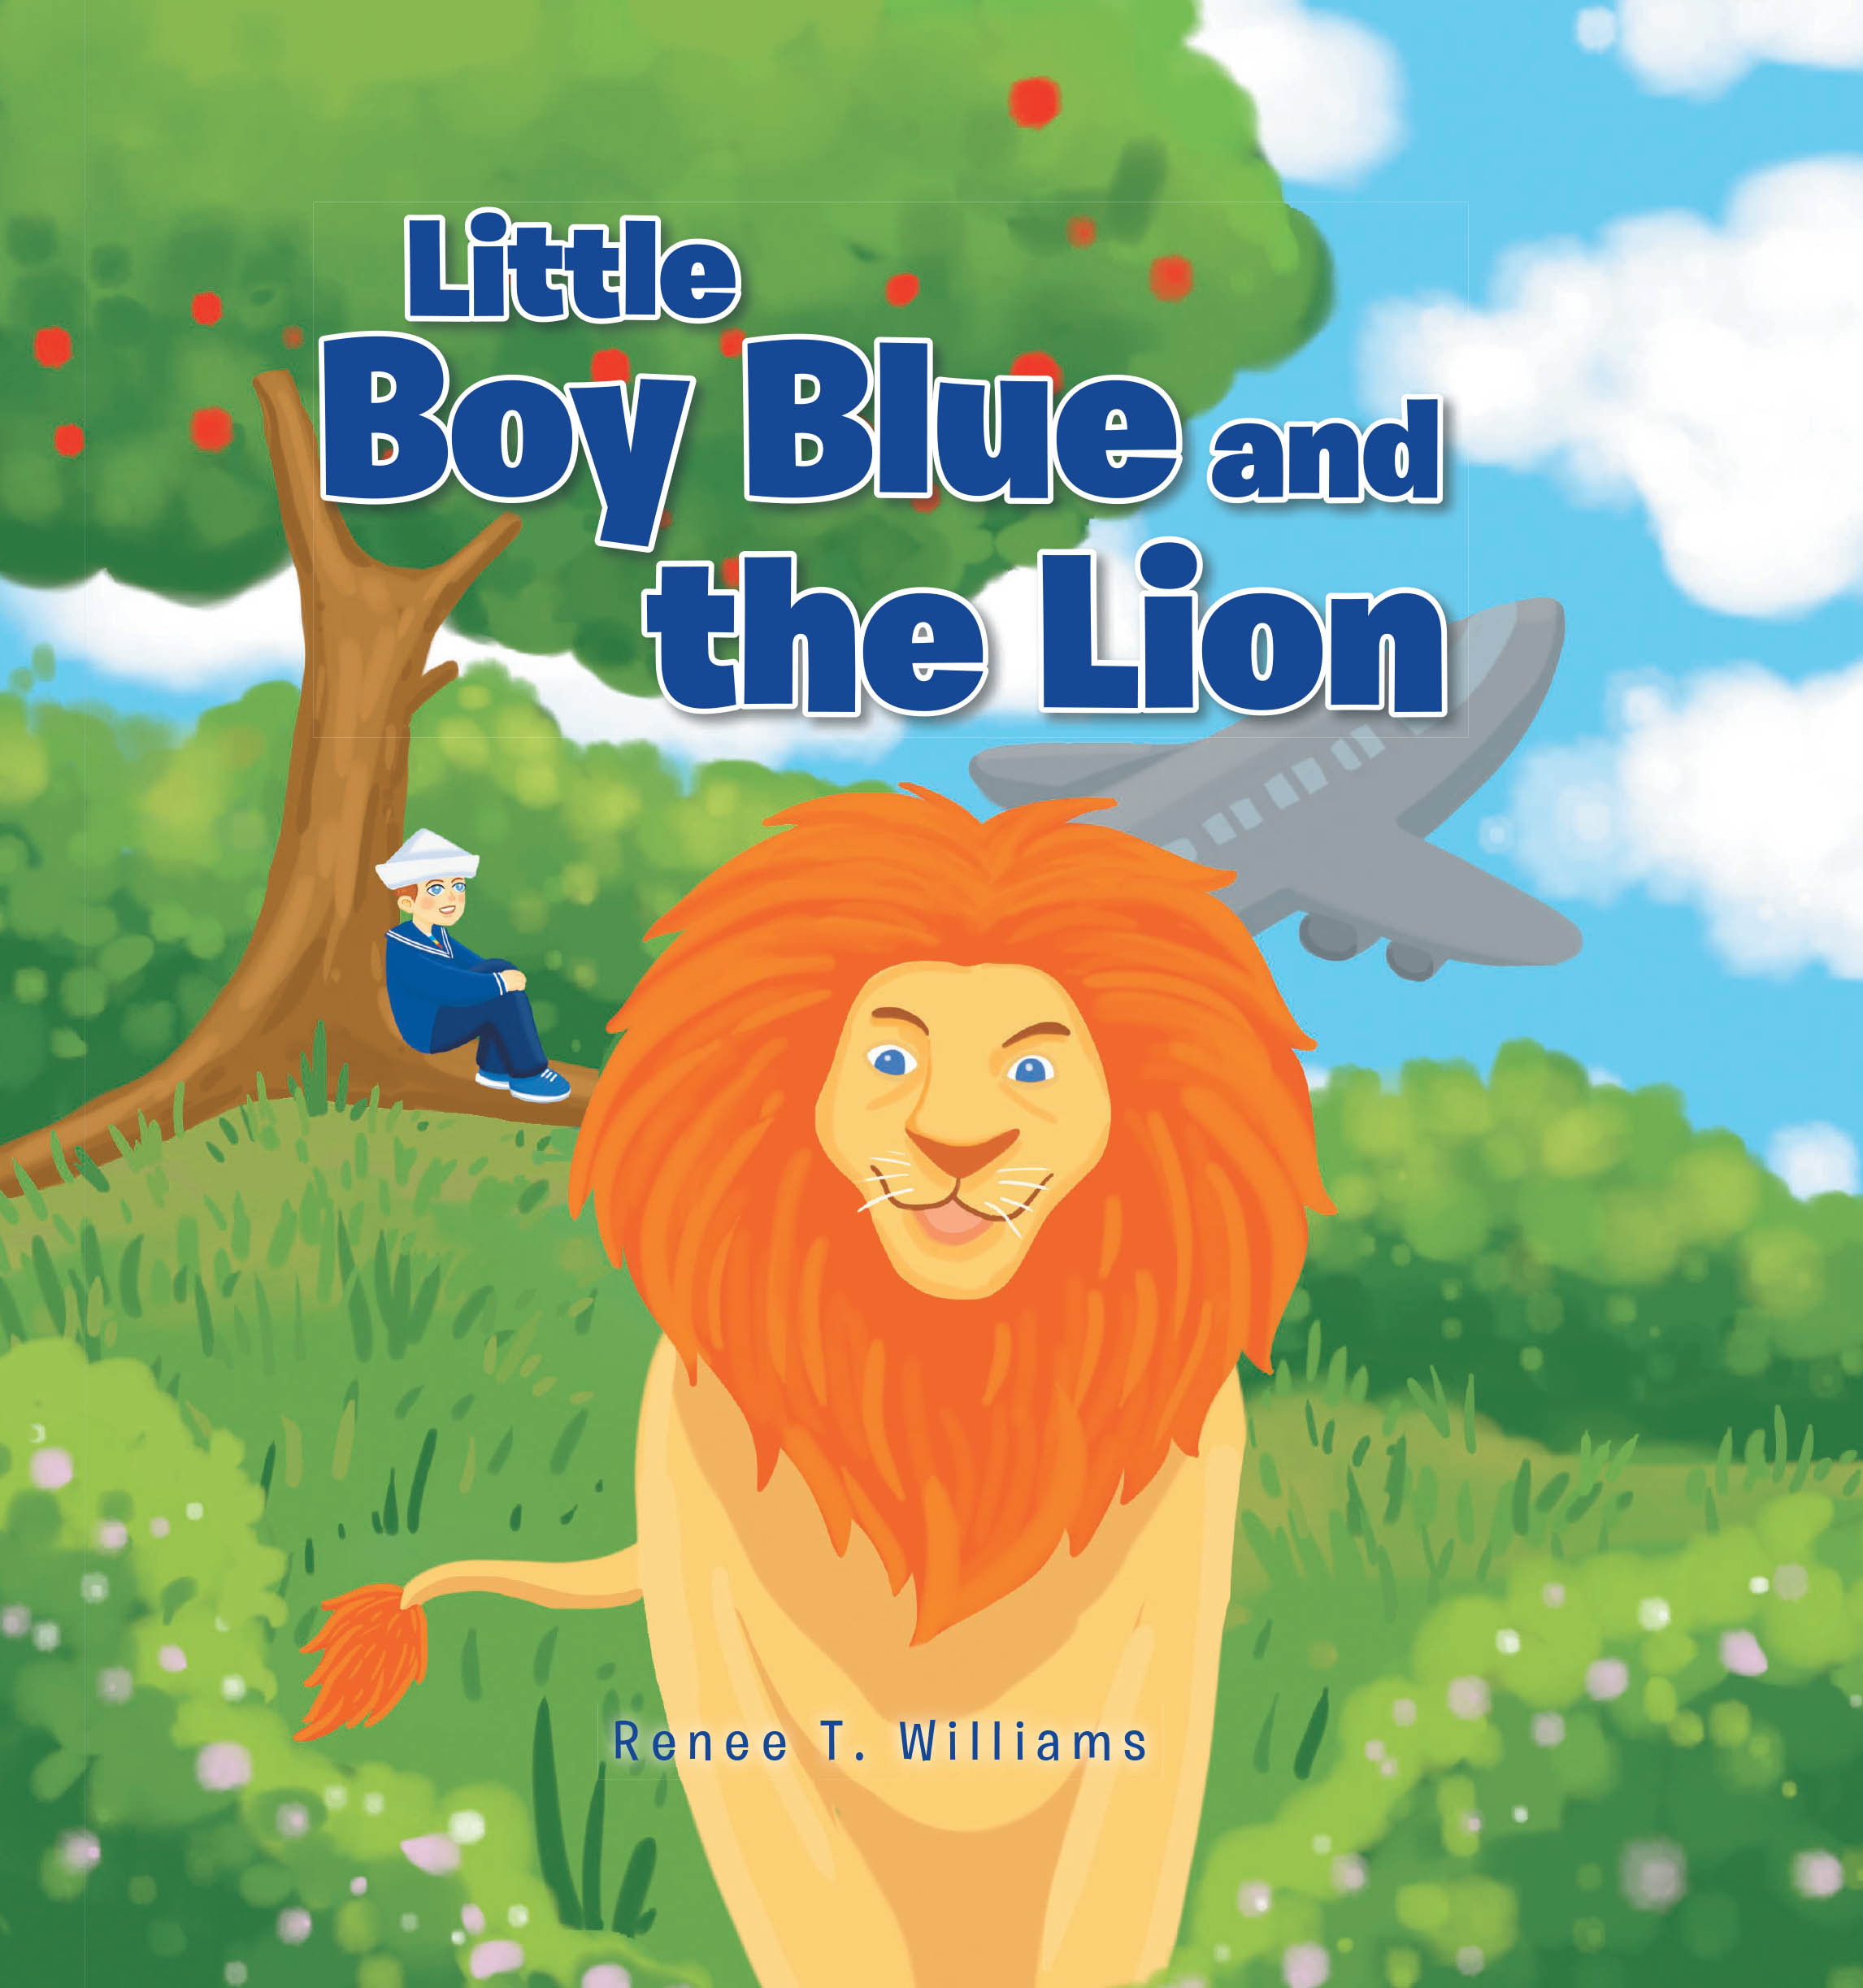 Author Renee T. Williams’s New Book, "Little Boy Blue and the Lion," Follows a Young Boy and His Father on a Journey to Discover the Majestic Lions of Africa